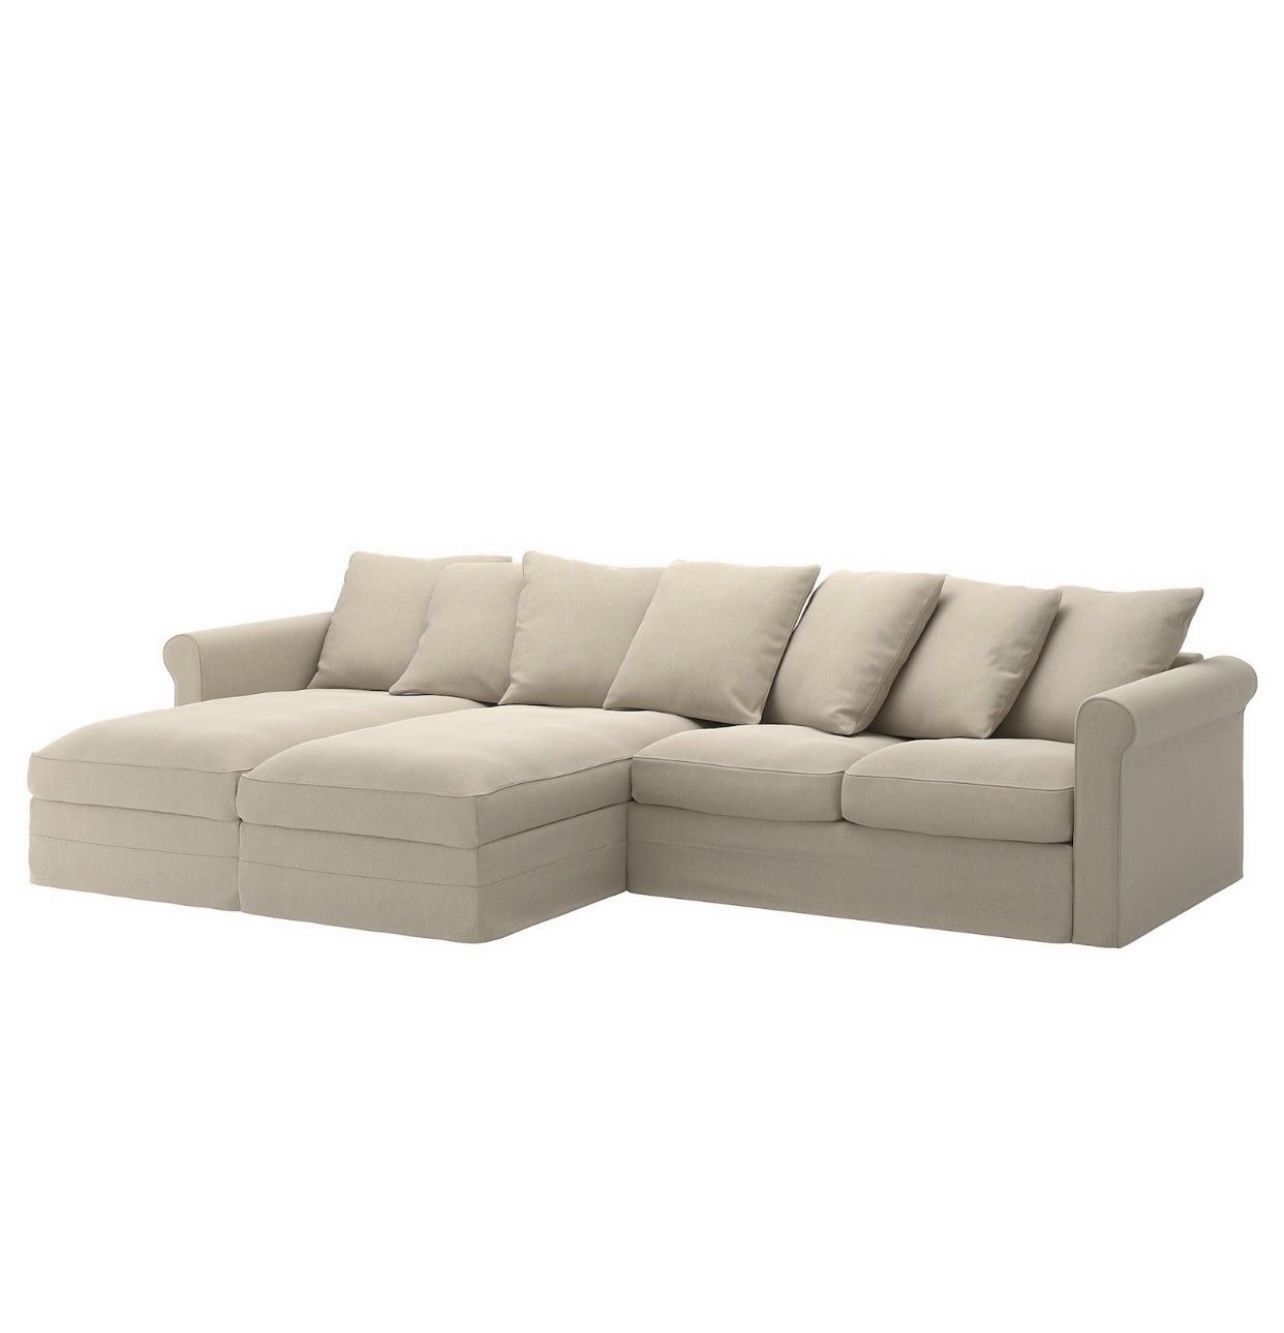 Sofa GRÖNLID Sectional, 4-seat, with chaise, Sporda natural 